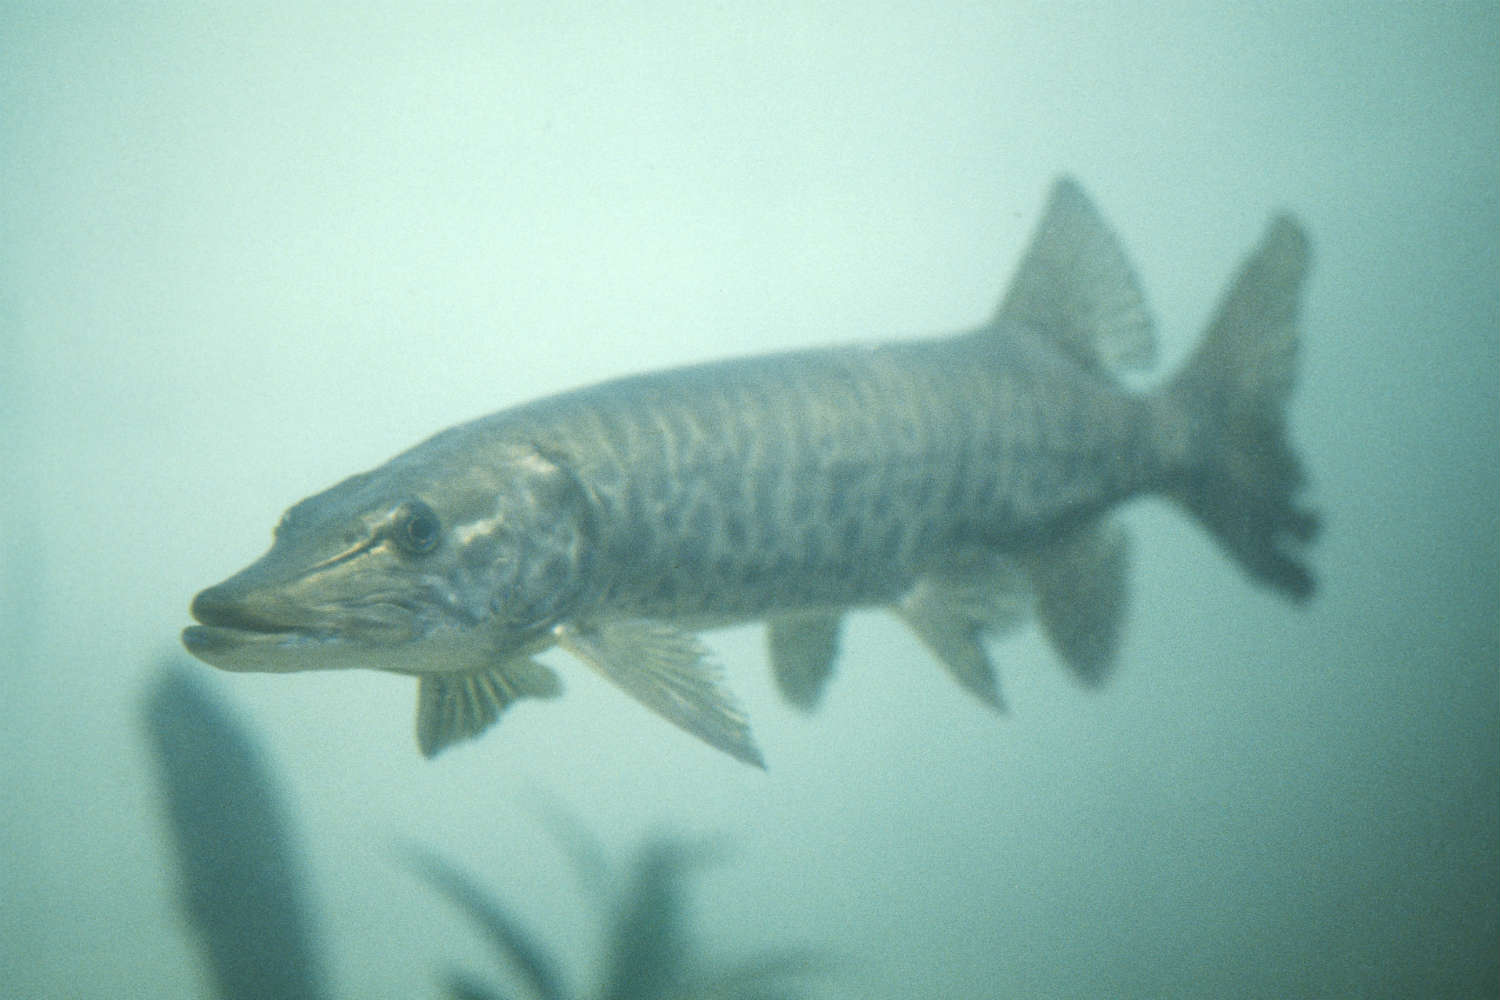 If you want to catch a muskie, try it during the full moon (Photo Researchers via Getty Images)